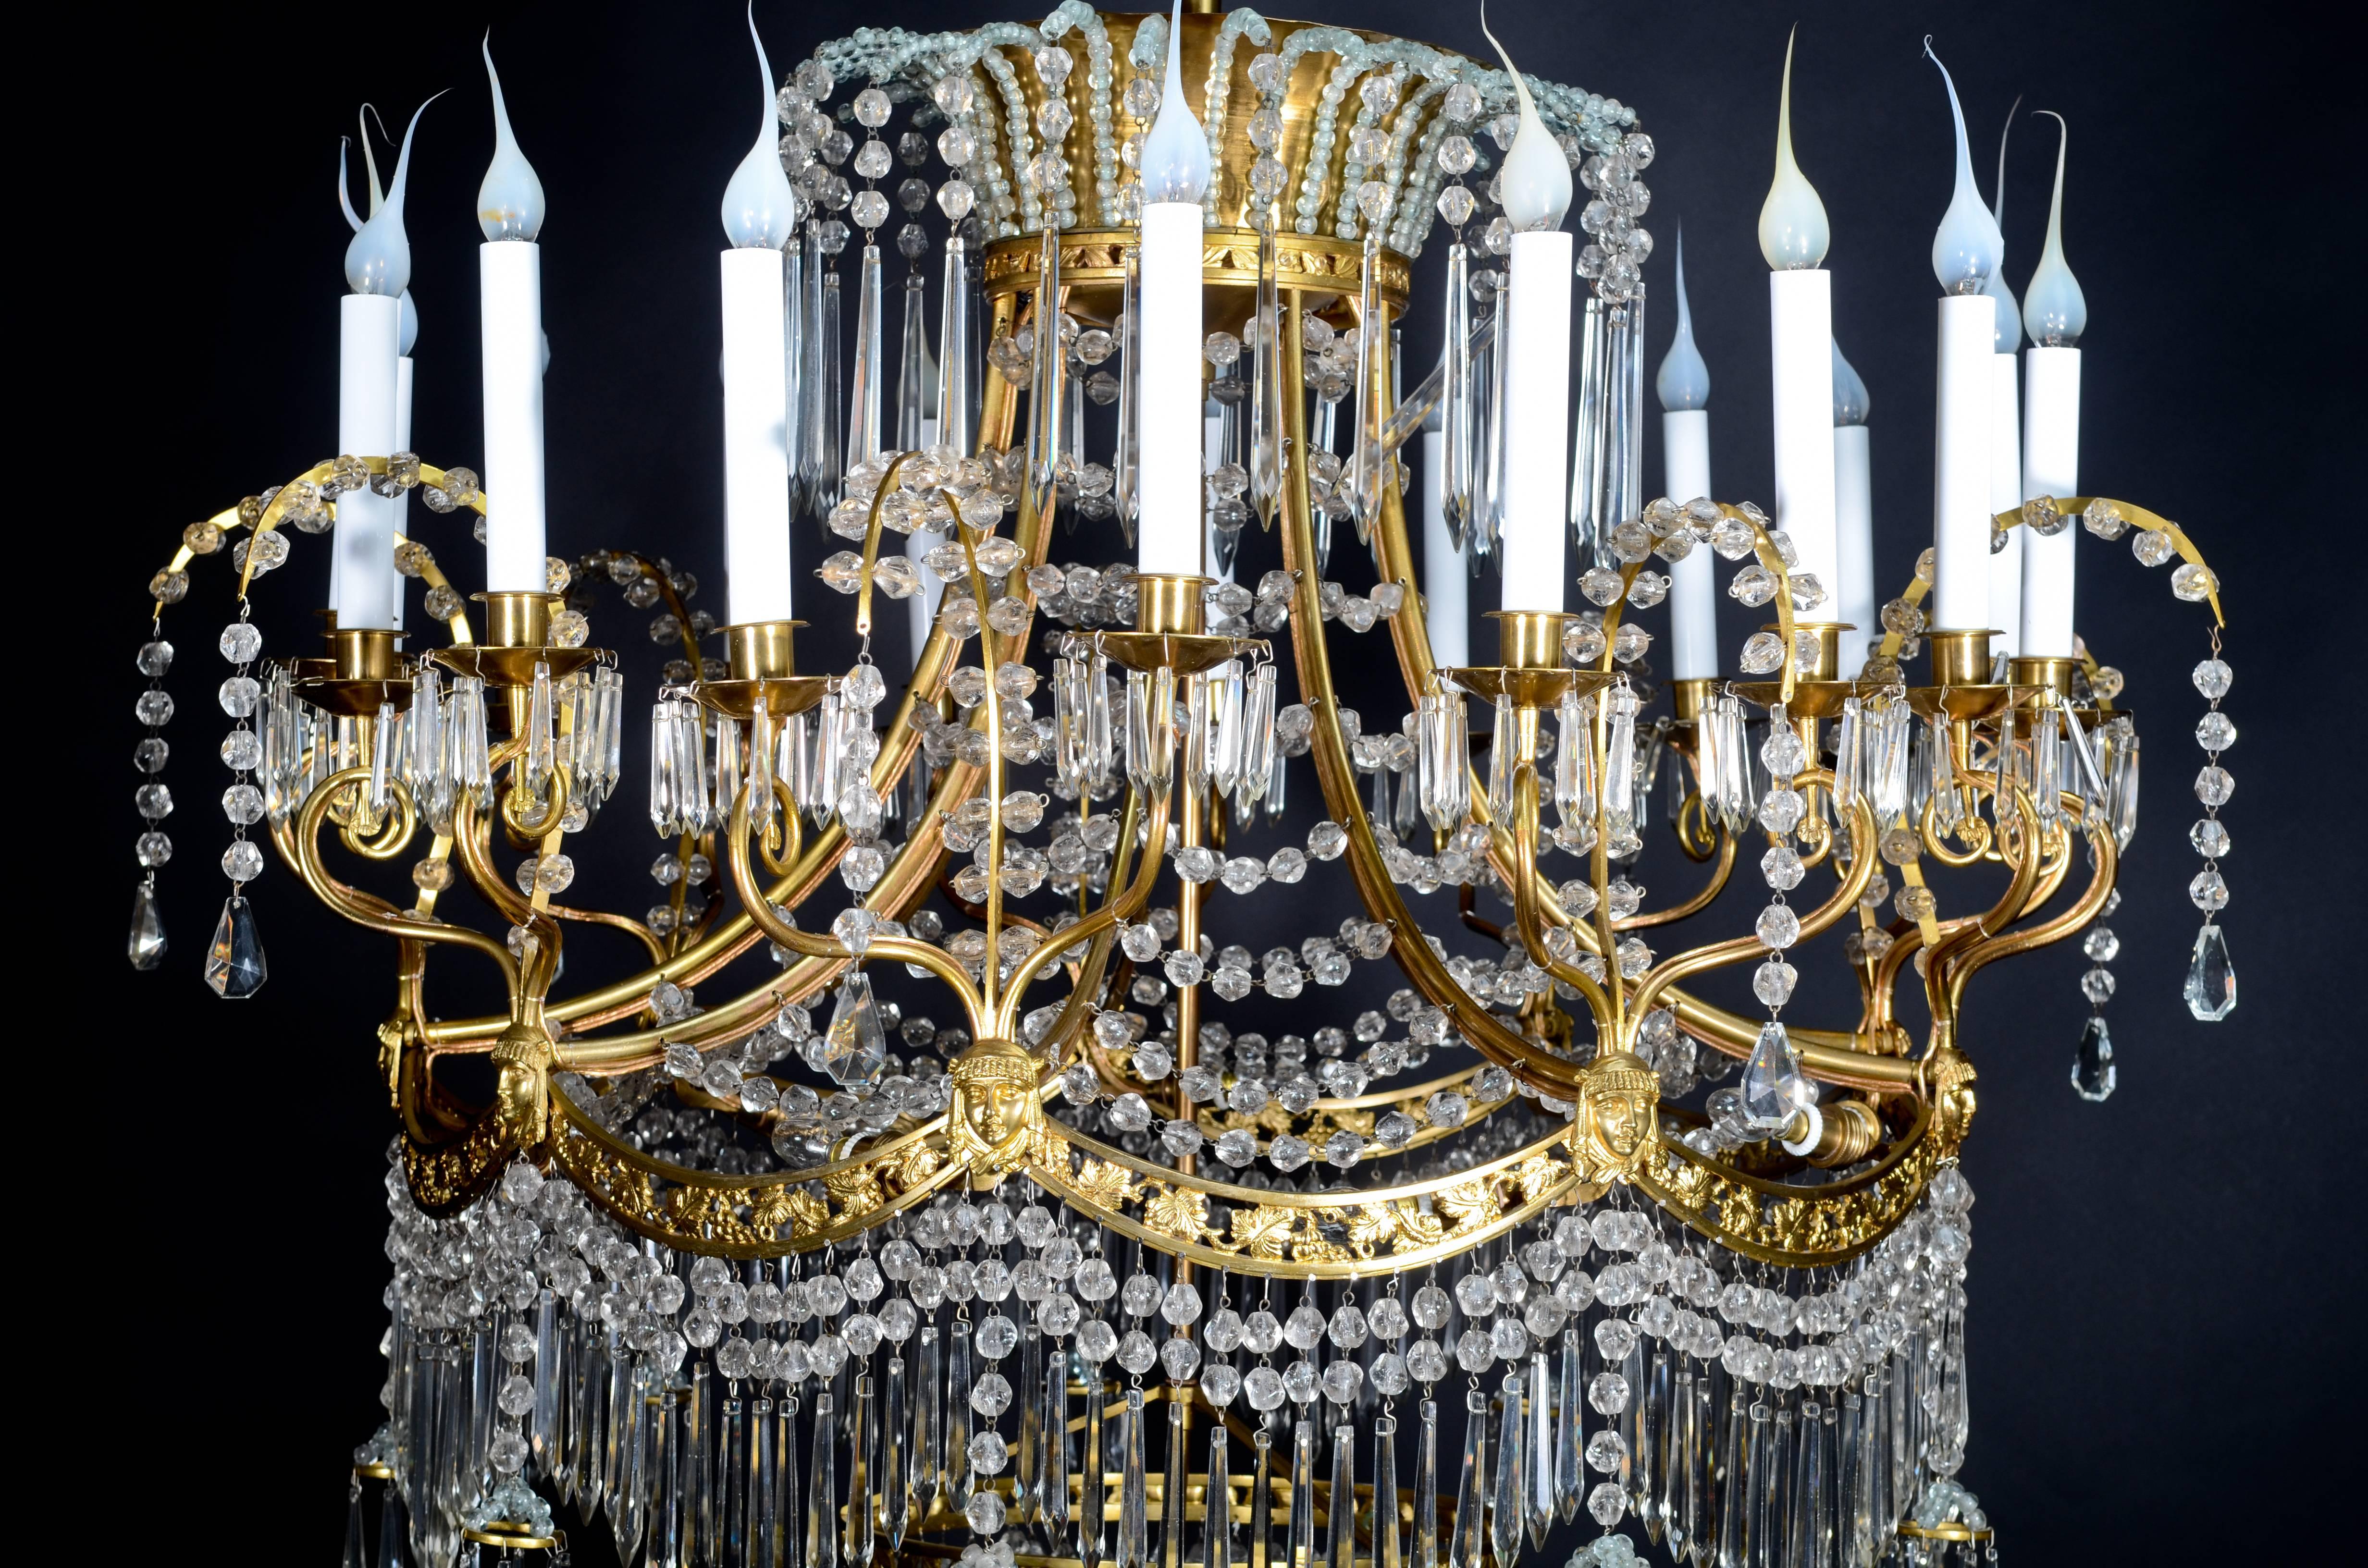 European Palatial & Large Antique Russian Neoclassical Gilt Bronze and Crystal Chandelier For Sale